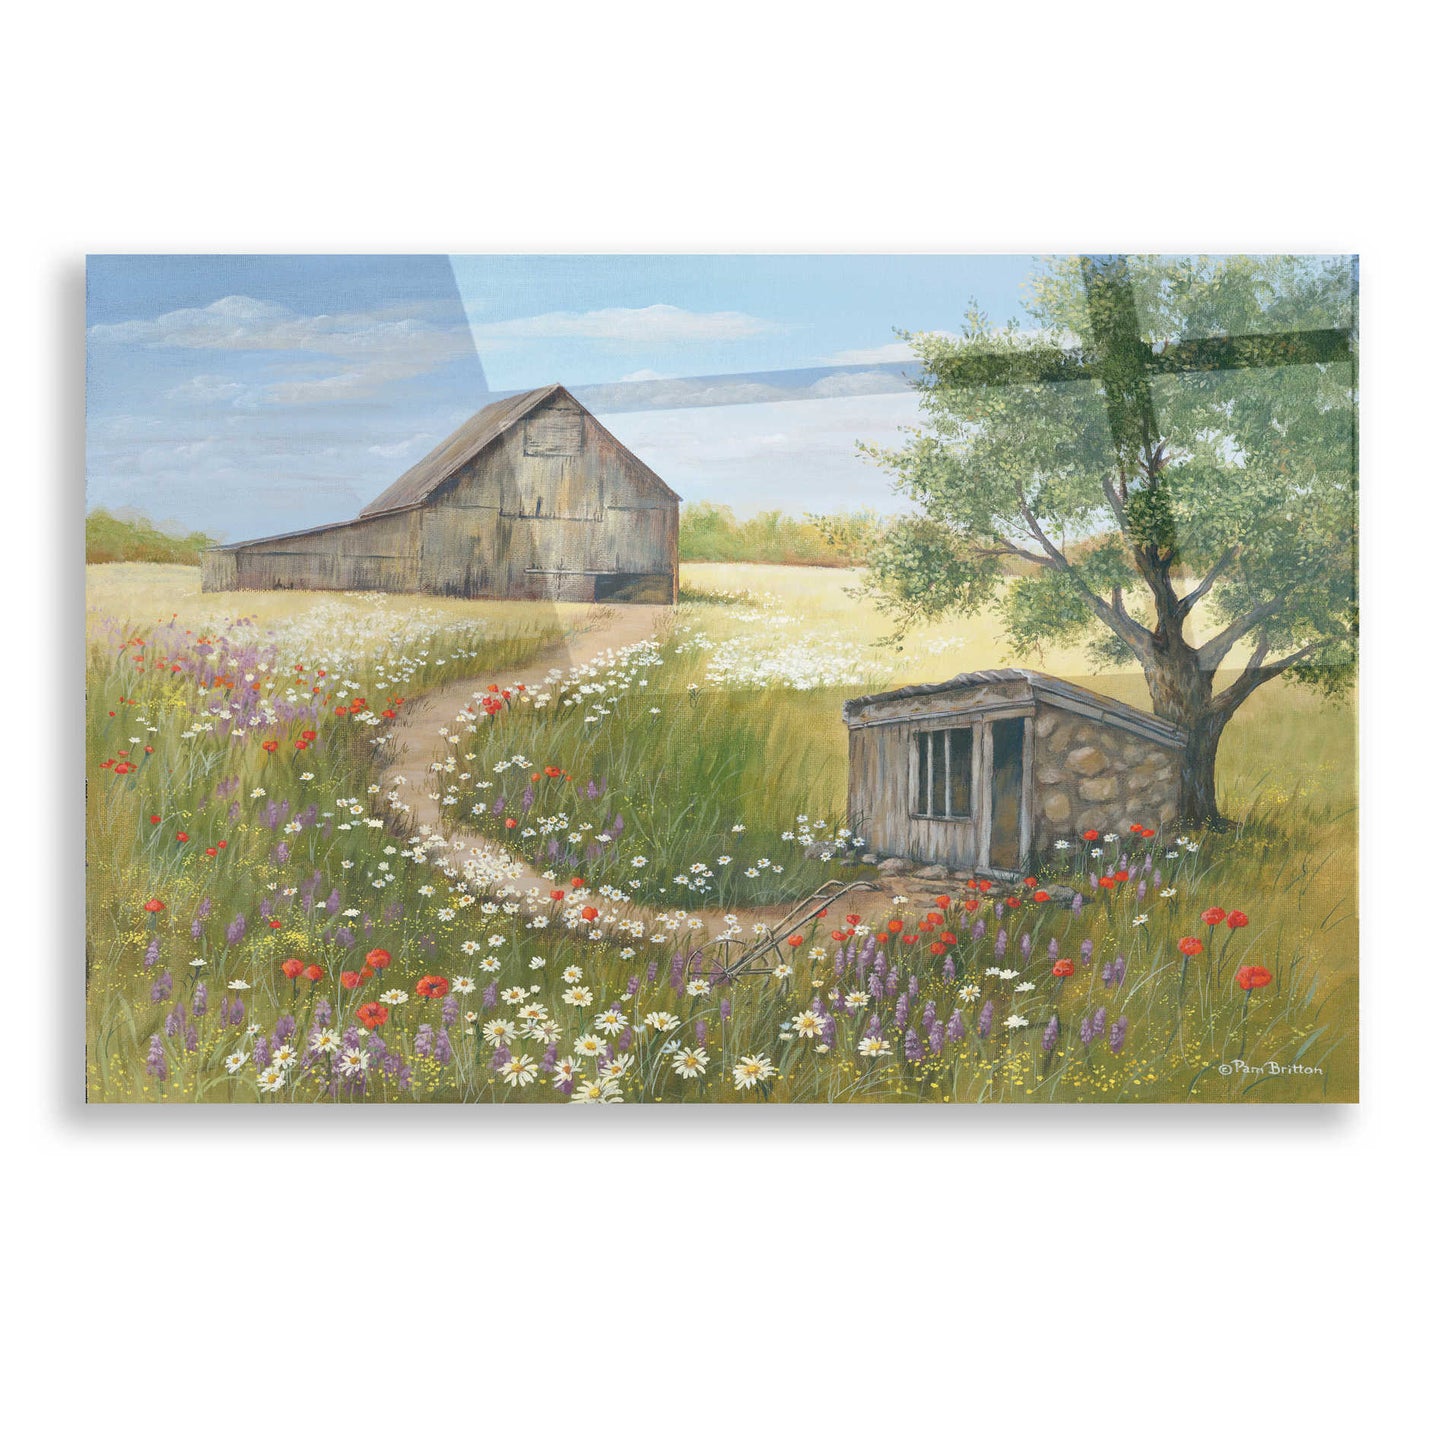 Epic Art 'Country Wildflowers II' by Pam Britton, Acrylic Glass Wall Art,16x12